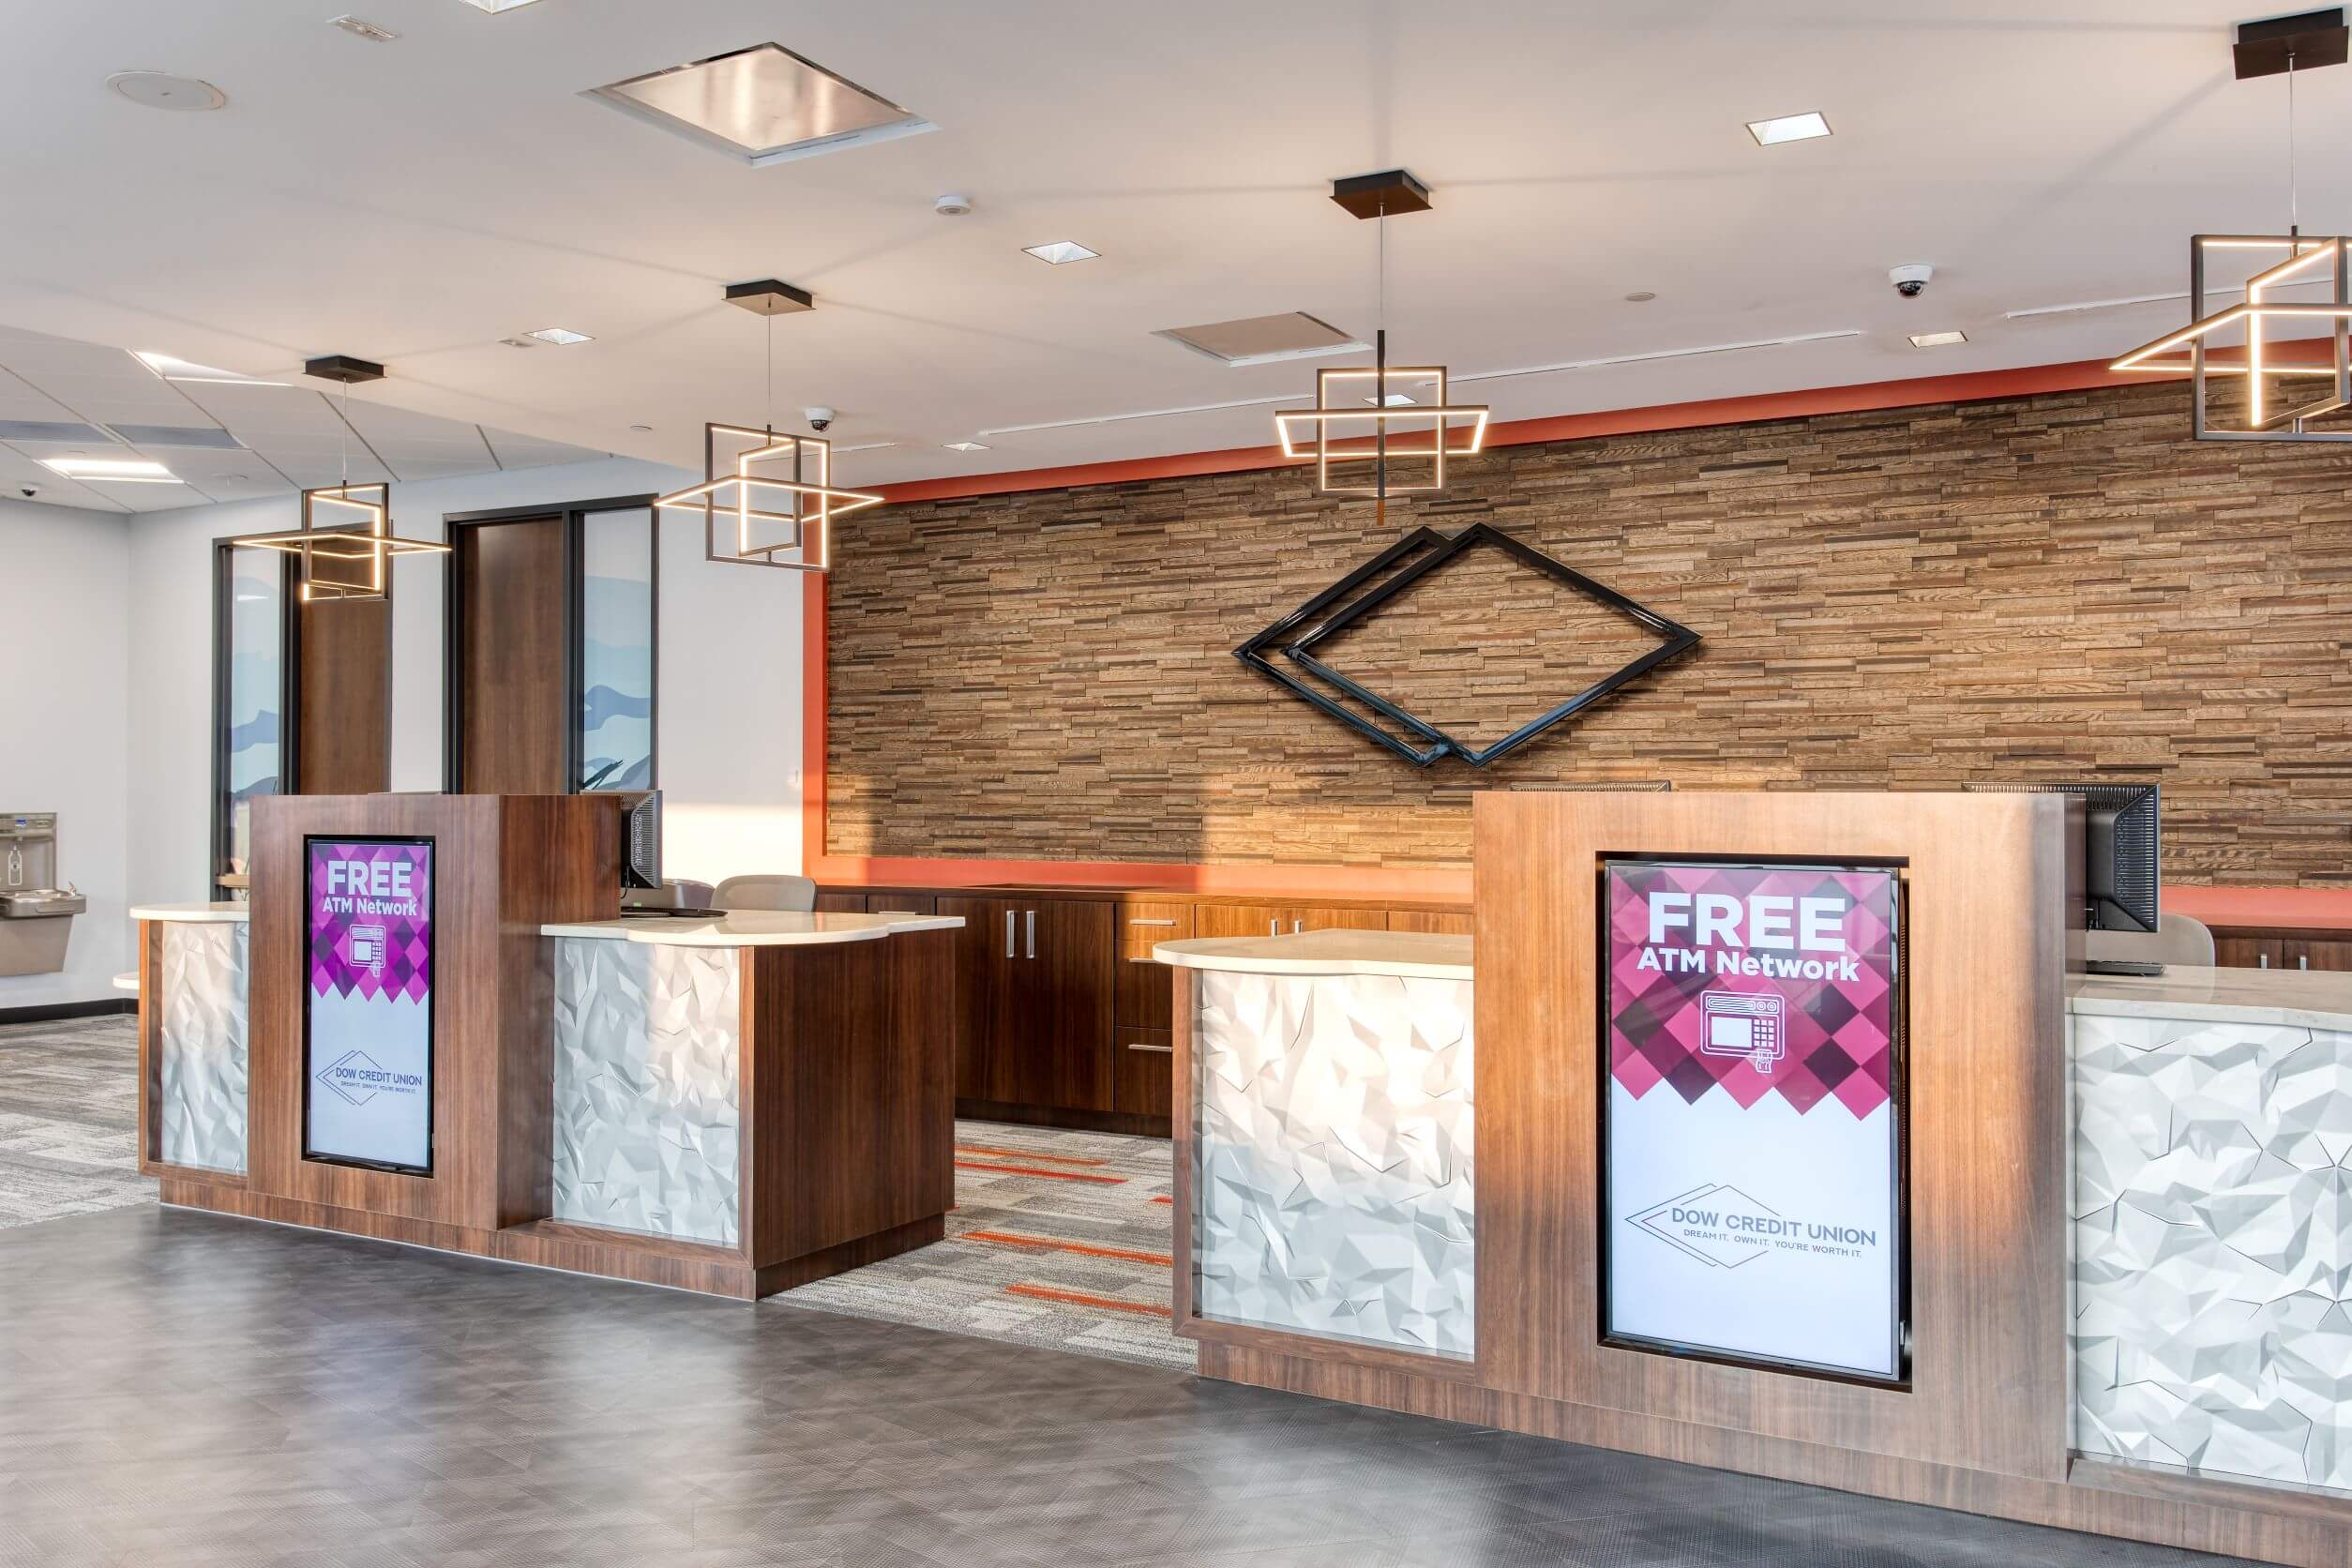 Branded digital displays that are built into the teller pods